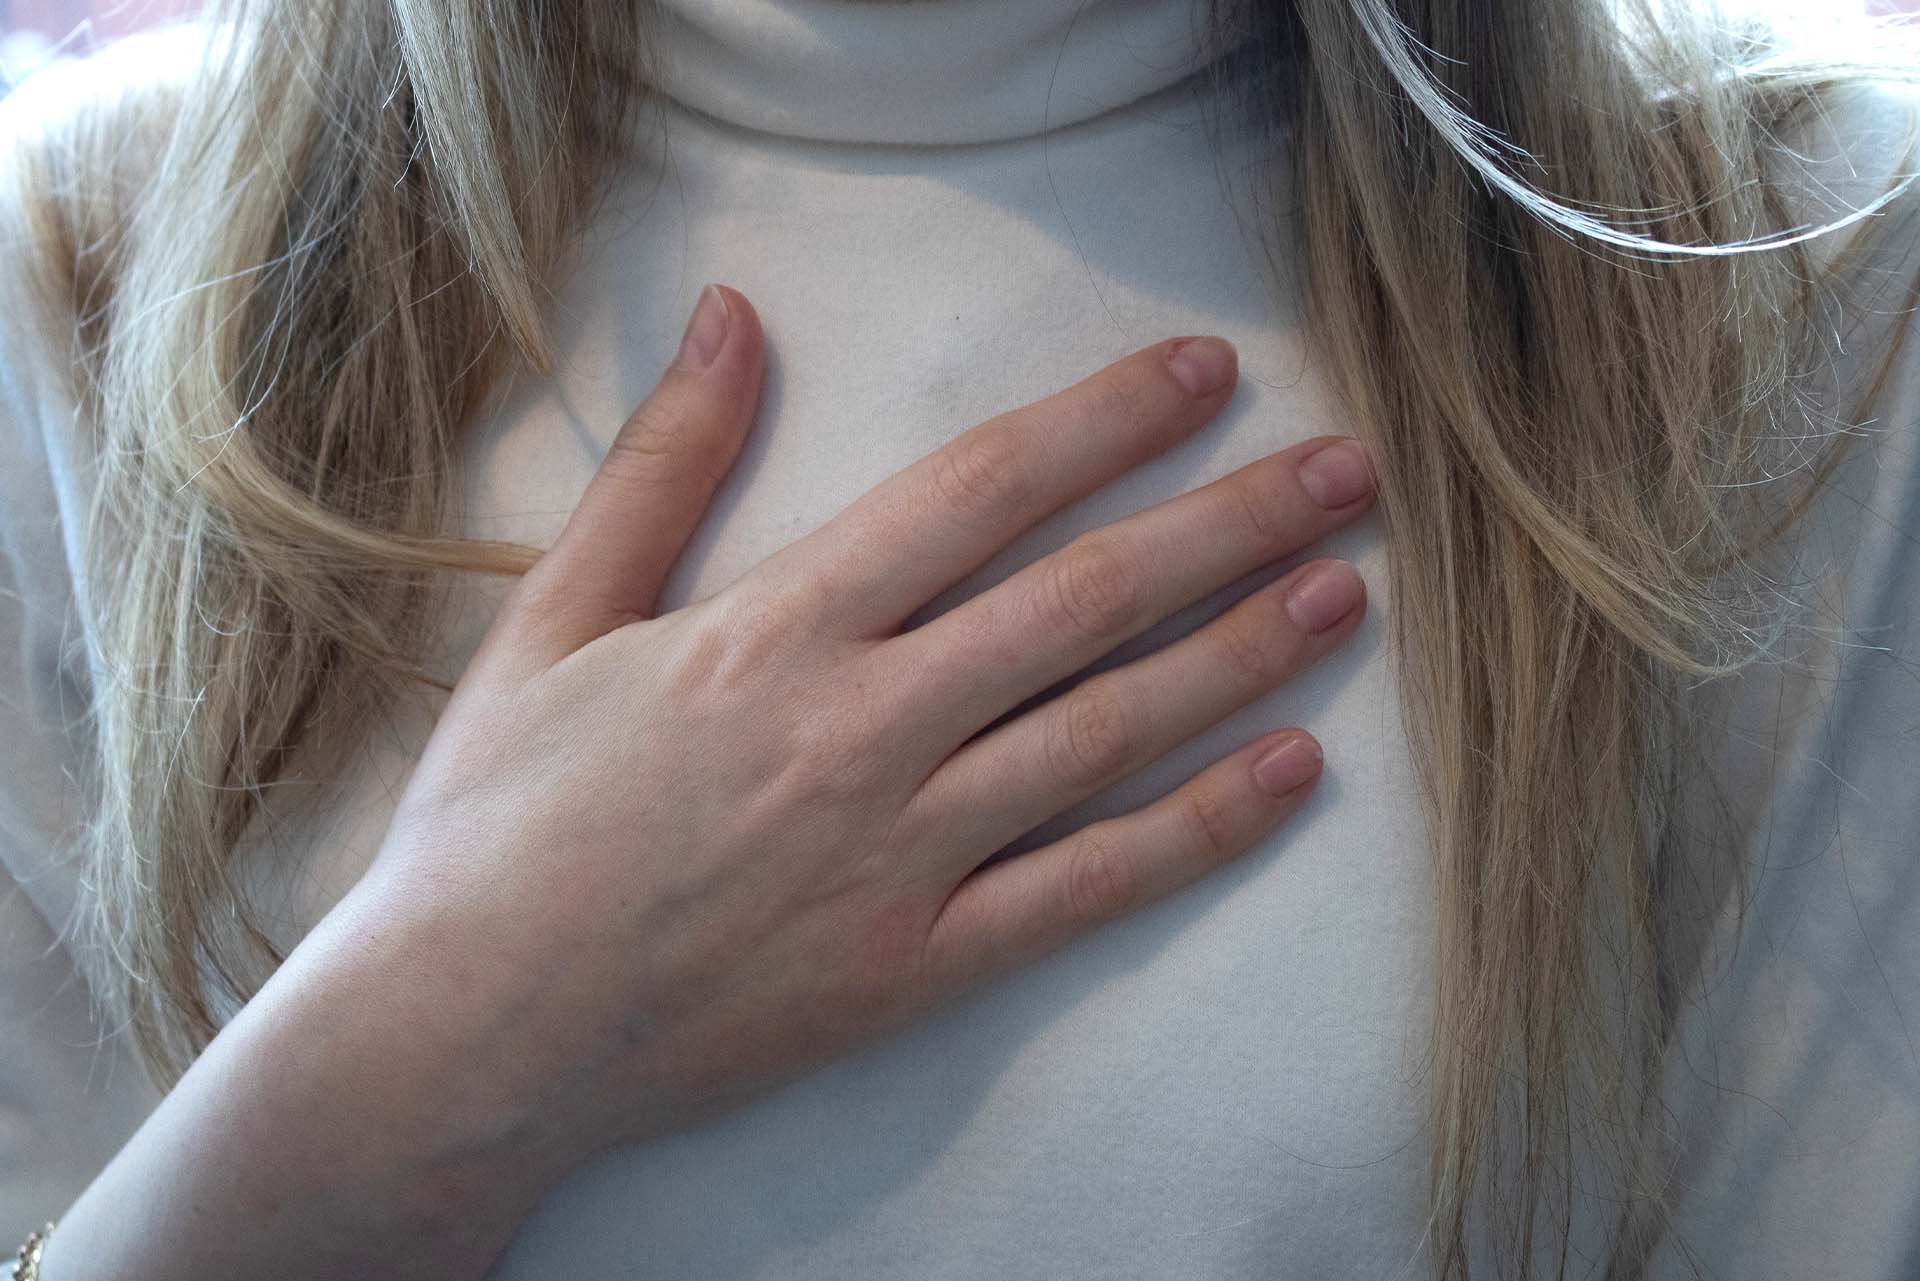 Main image of Adrian Louíse Calcagnotto touching her chest to control her breathing. Photo by: Dalia Nardolillo